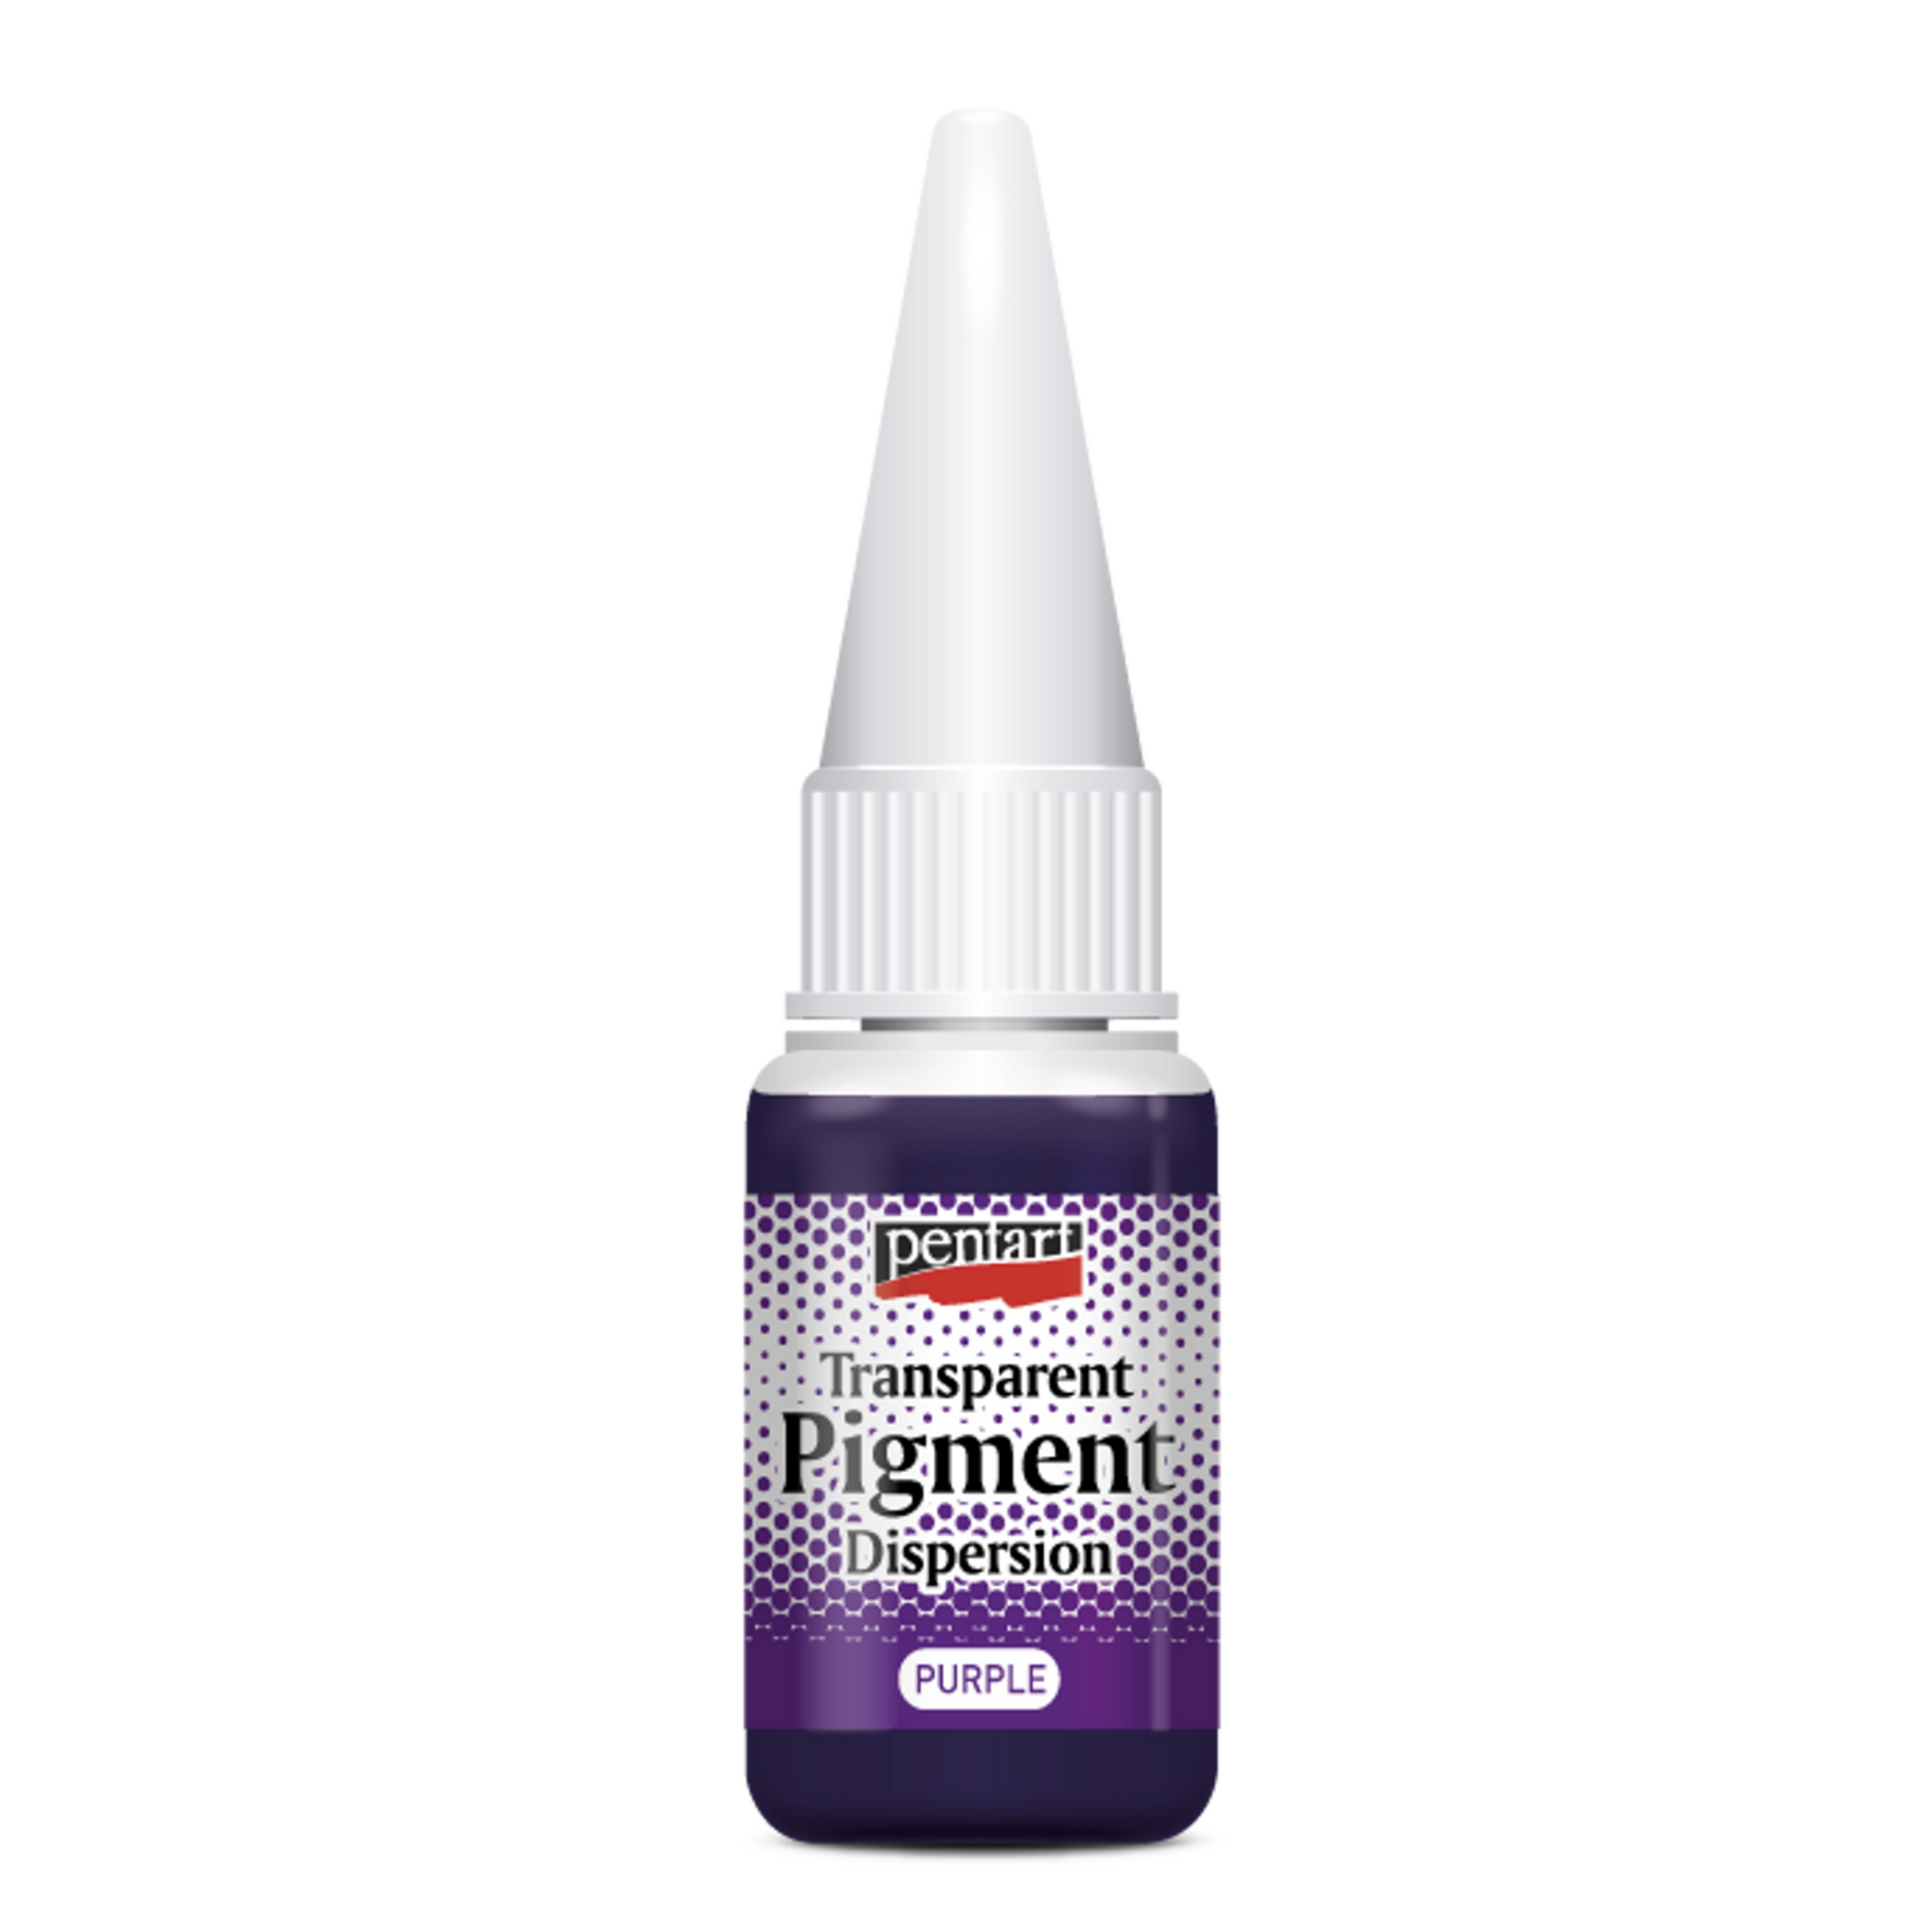 Transparent Pigment Dispersion in Purple by Pentart available at Milton's Daughter.